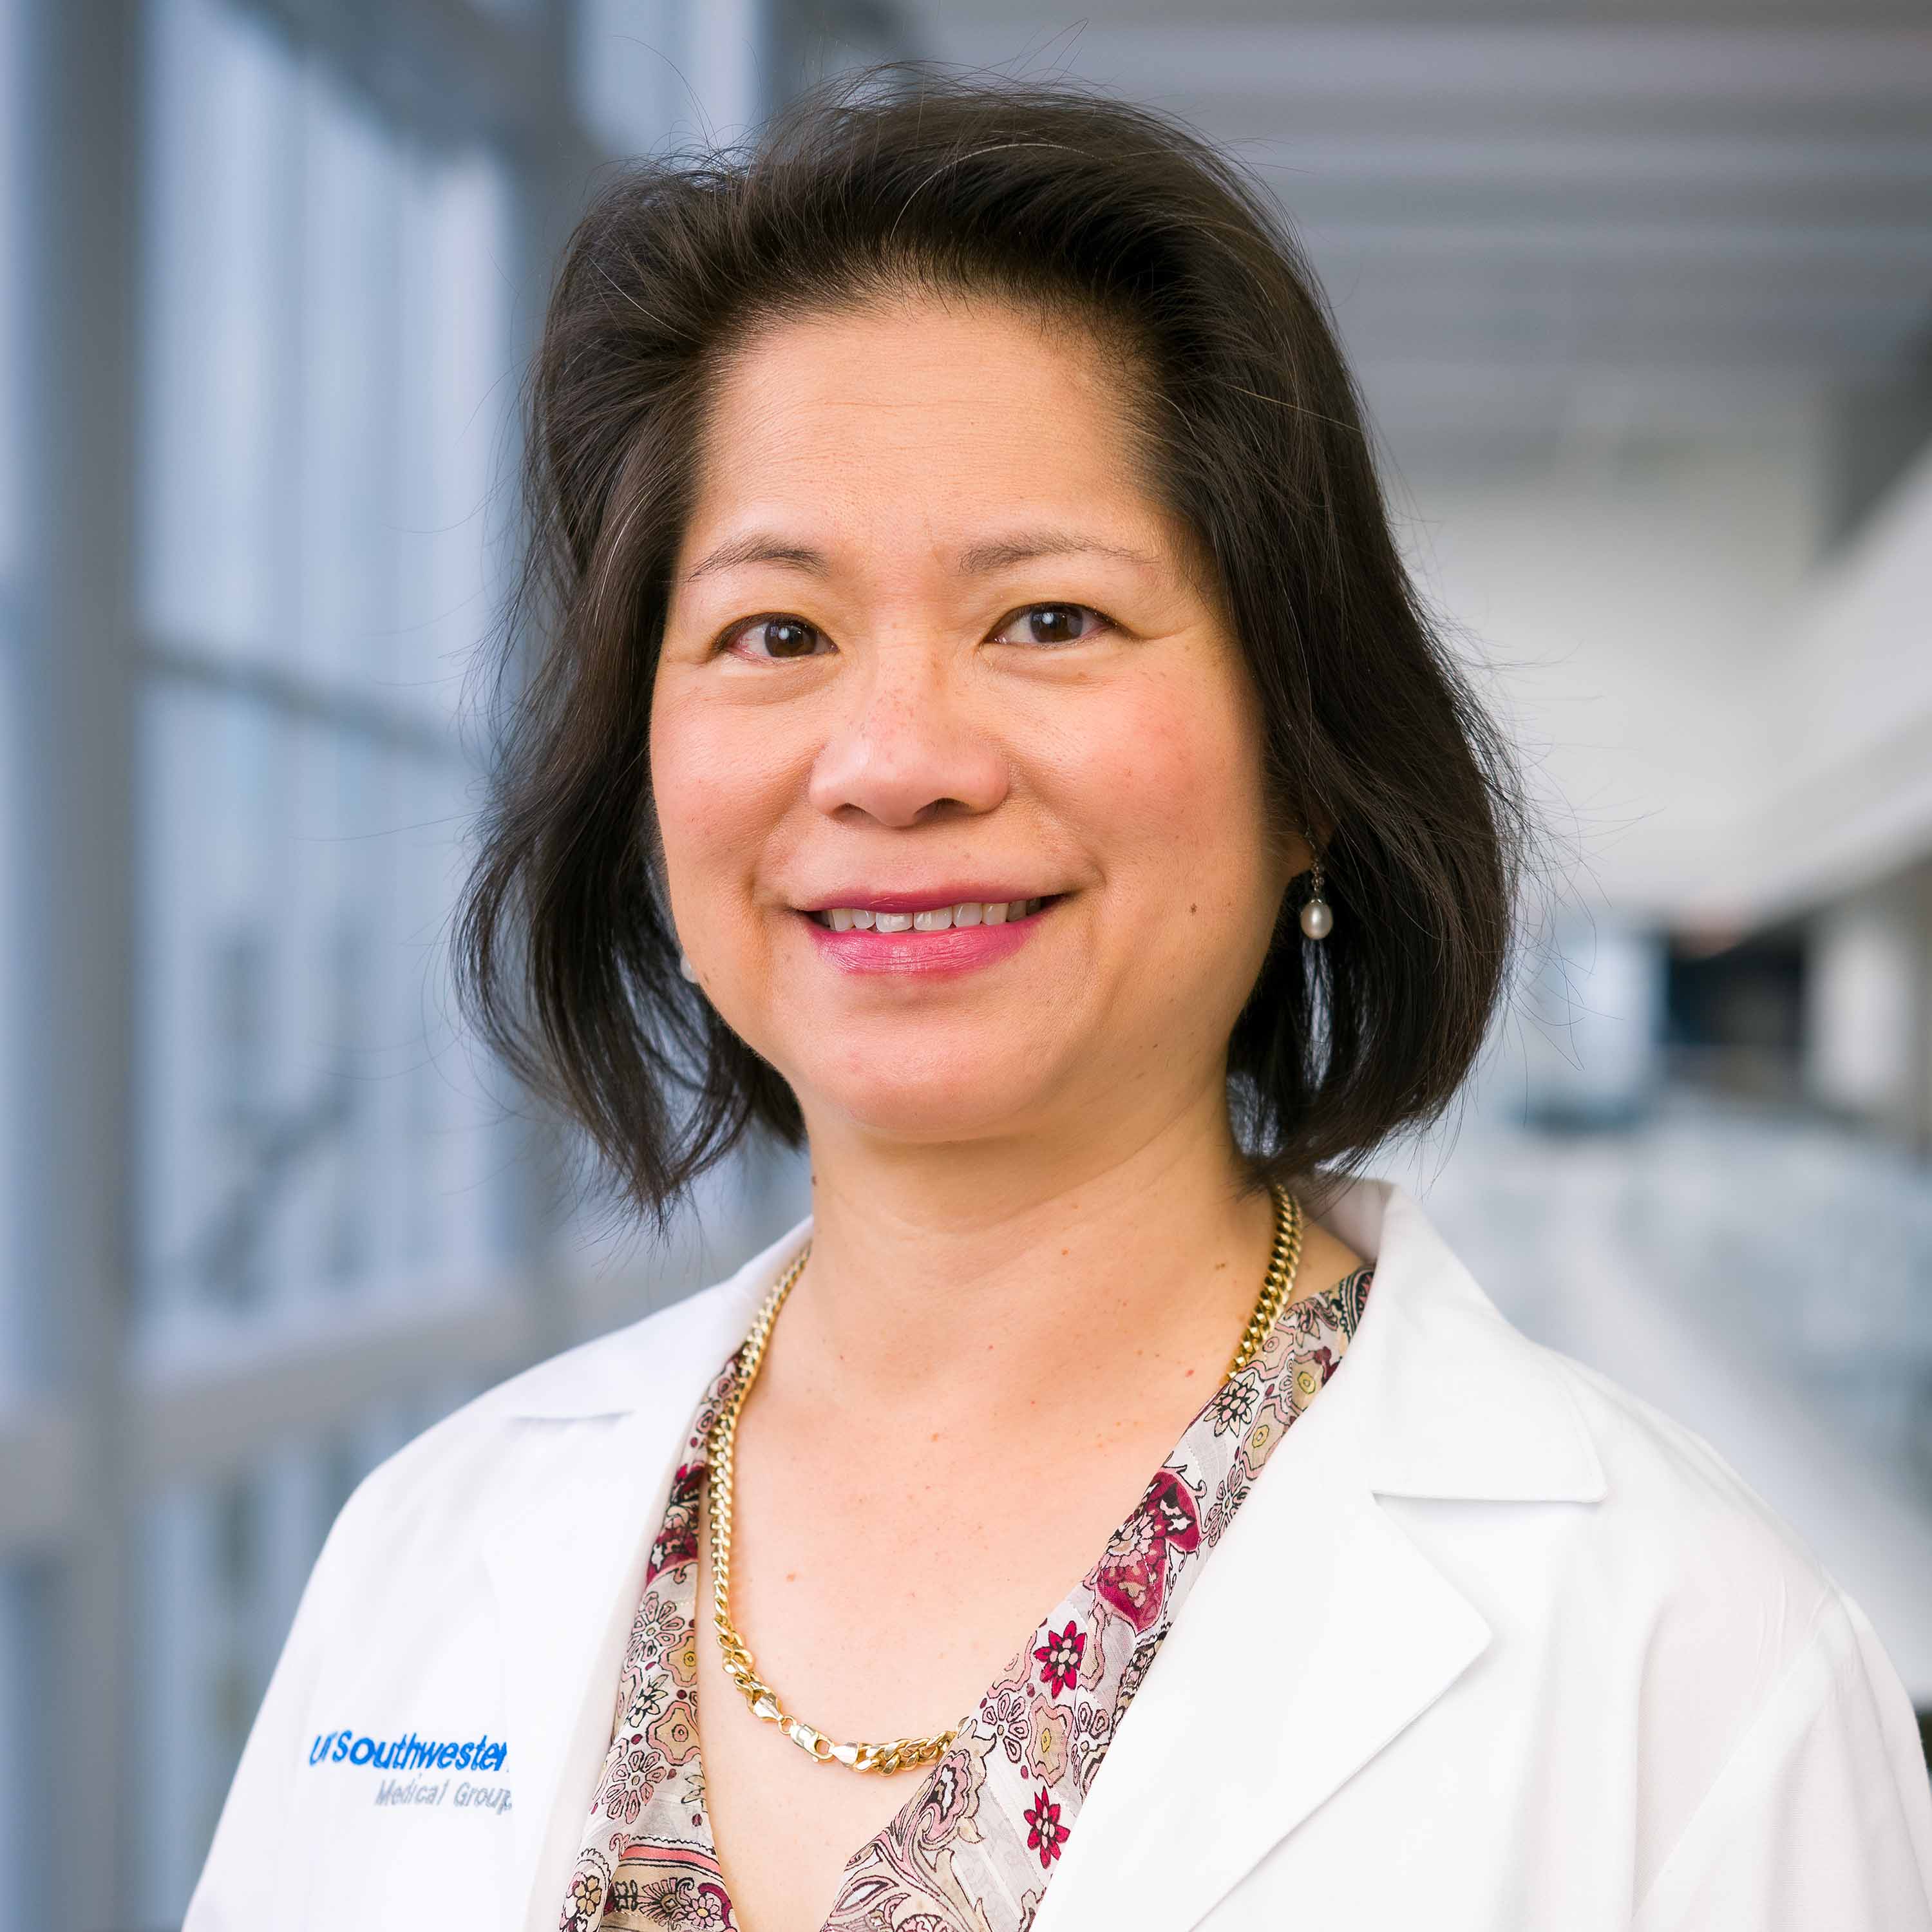 Dr. Emina Huang Named as Chair in Surgical Research